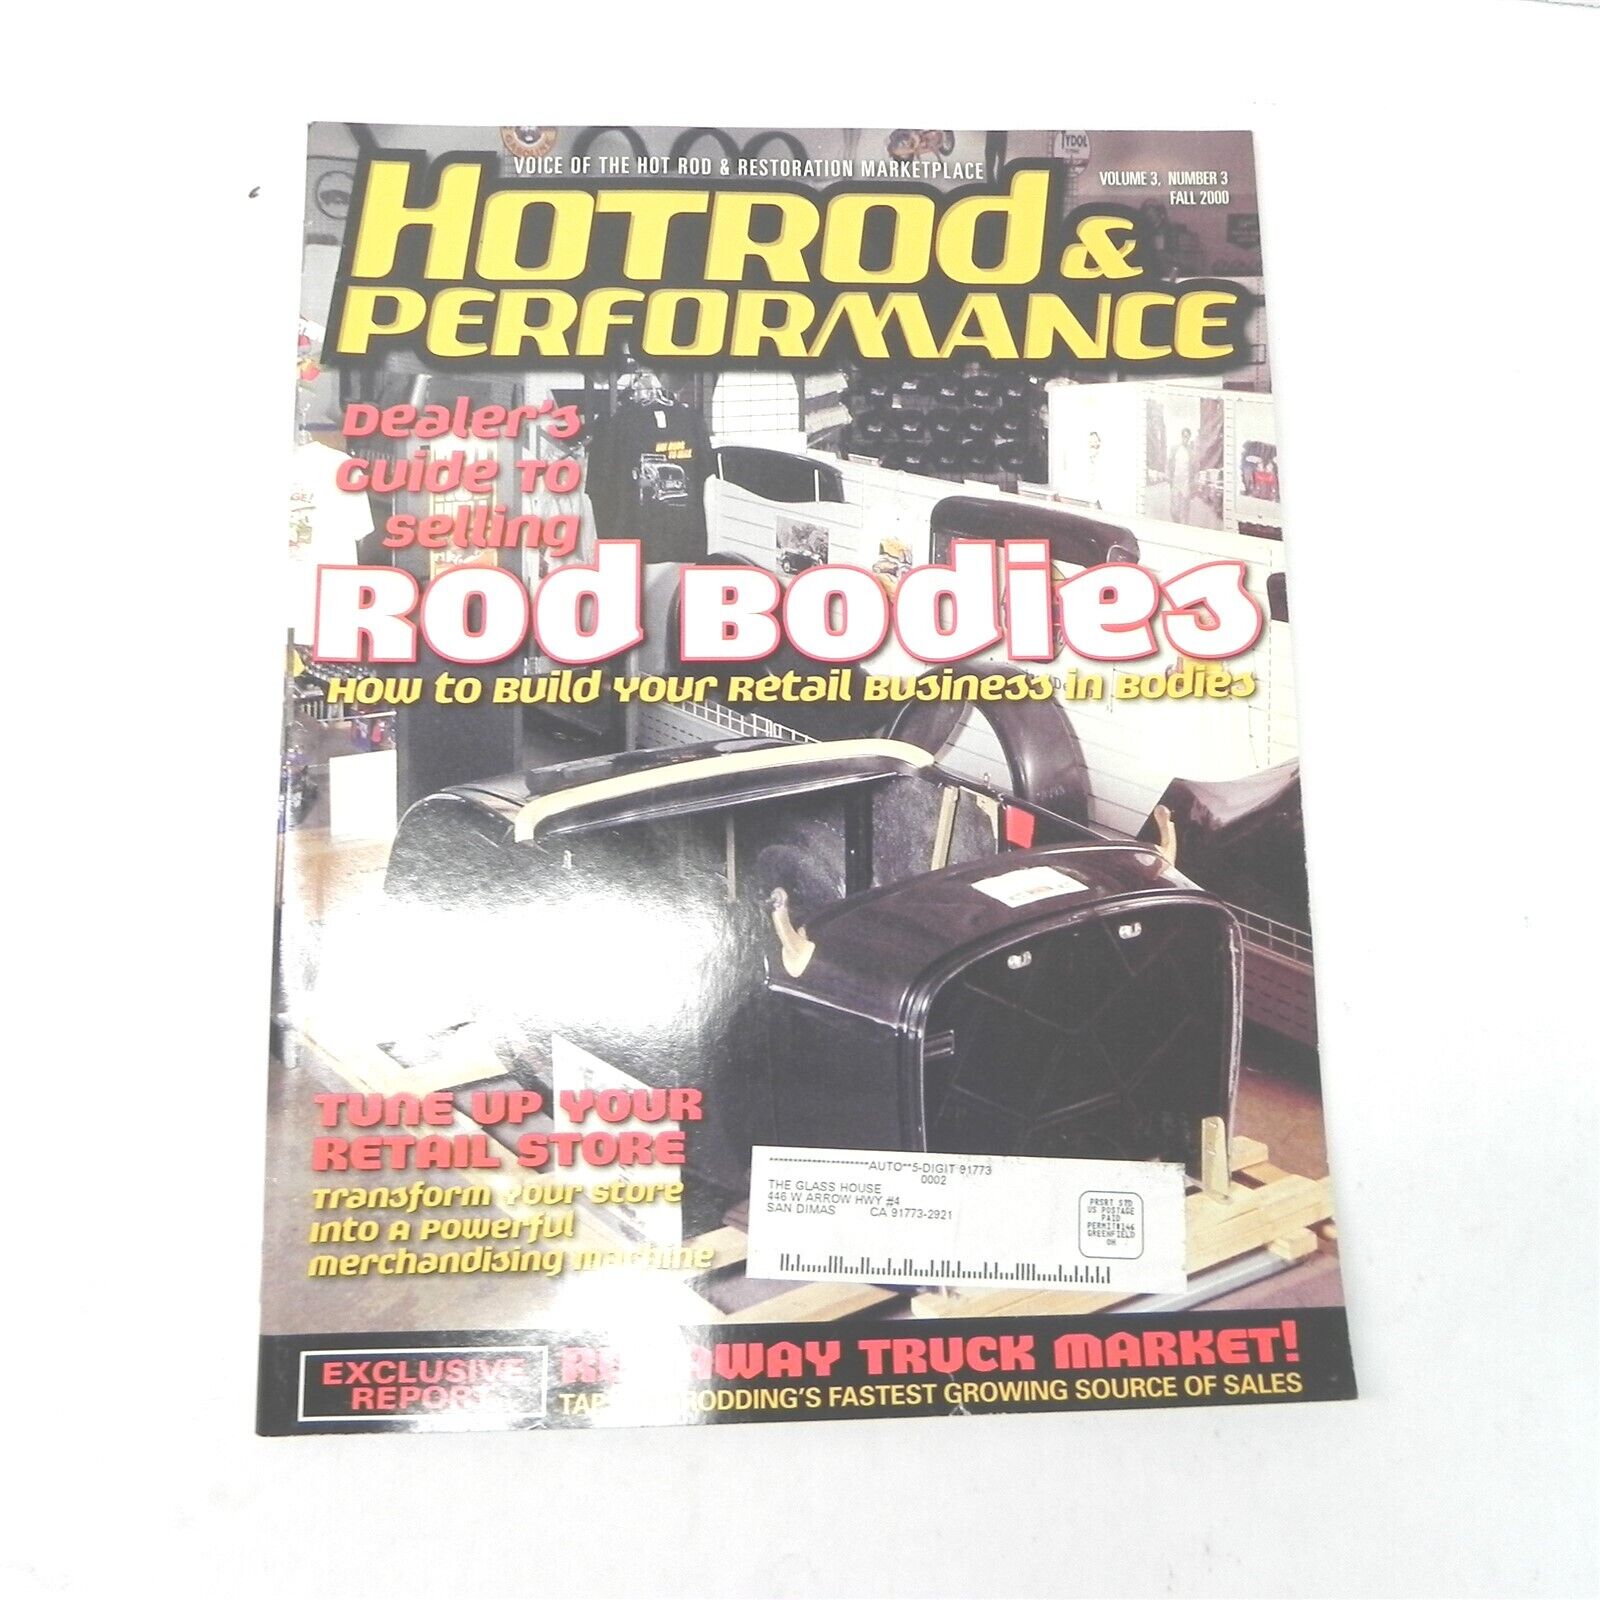 VINTAGE FALL 2000 HOT ROD AND PERFORMANCE MAGAZINE SINGLE ISSUE DEALERS GUIDE